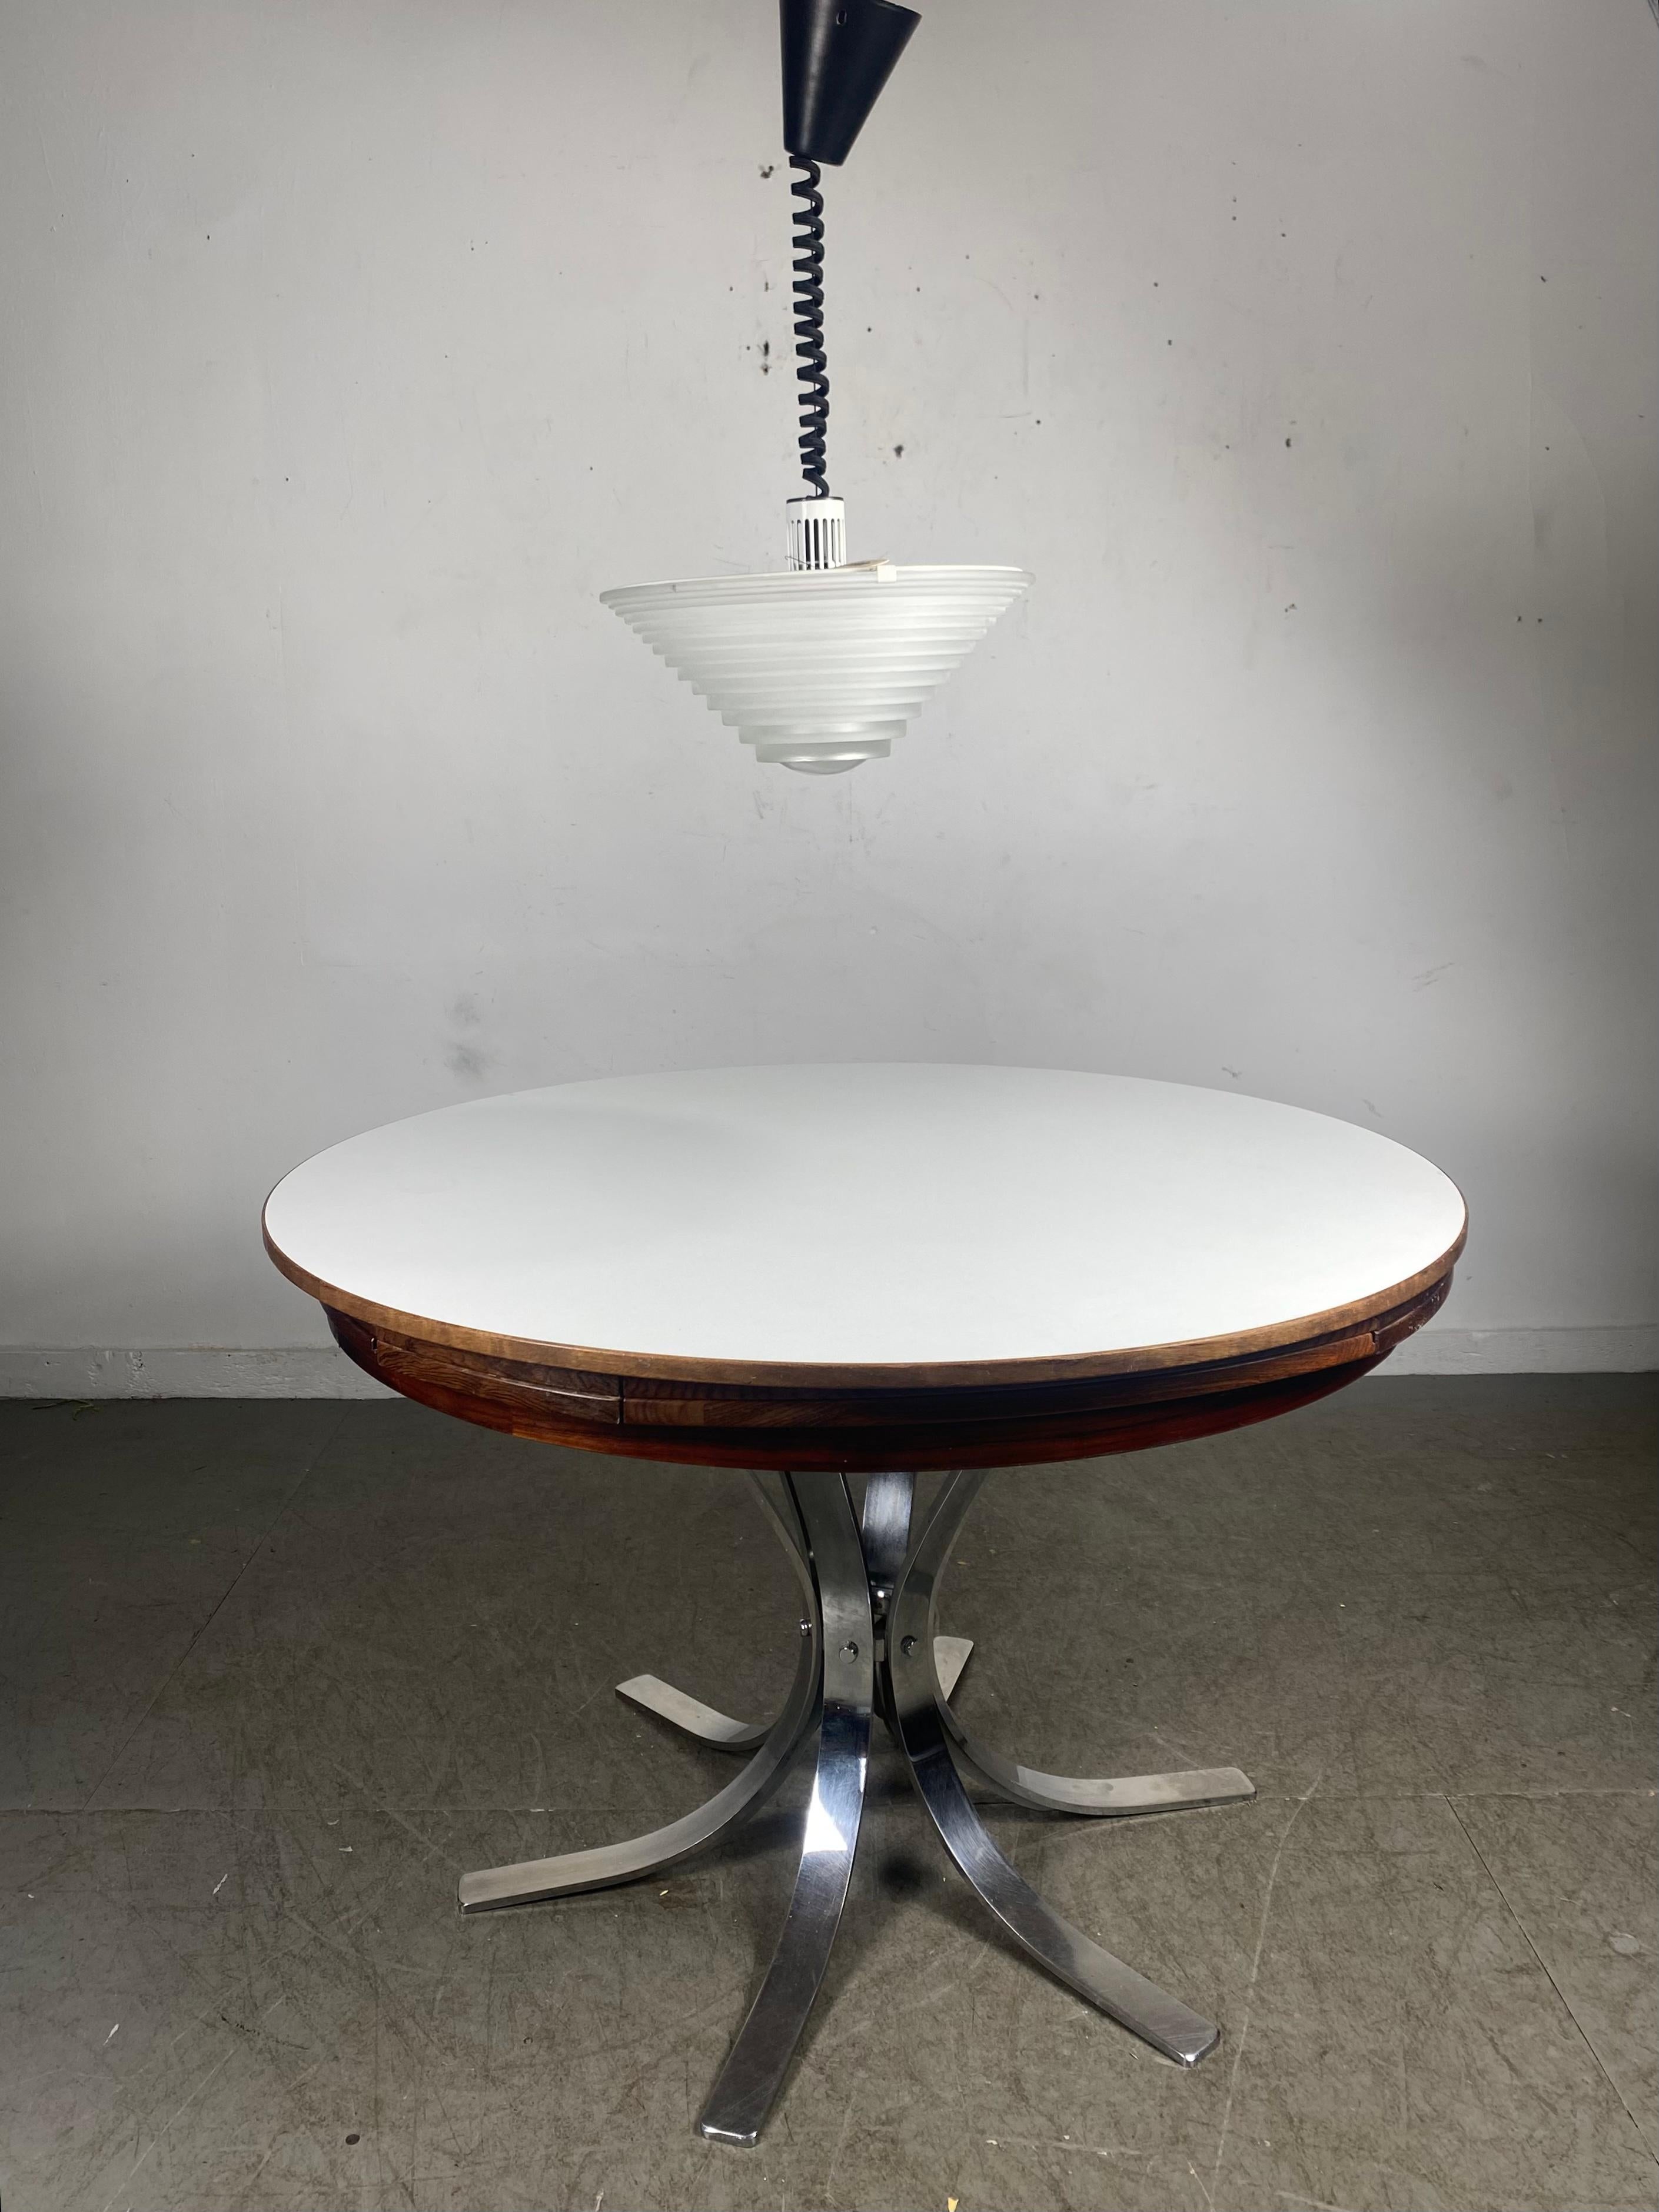 1970s Artemide “Egina 38” pendant lamp by Angelo Mangiarotti in excellent condition, it works perfectly. Made in Italy
This pendant lamp is a true piece of modern design.